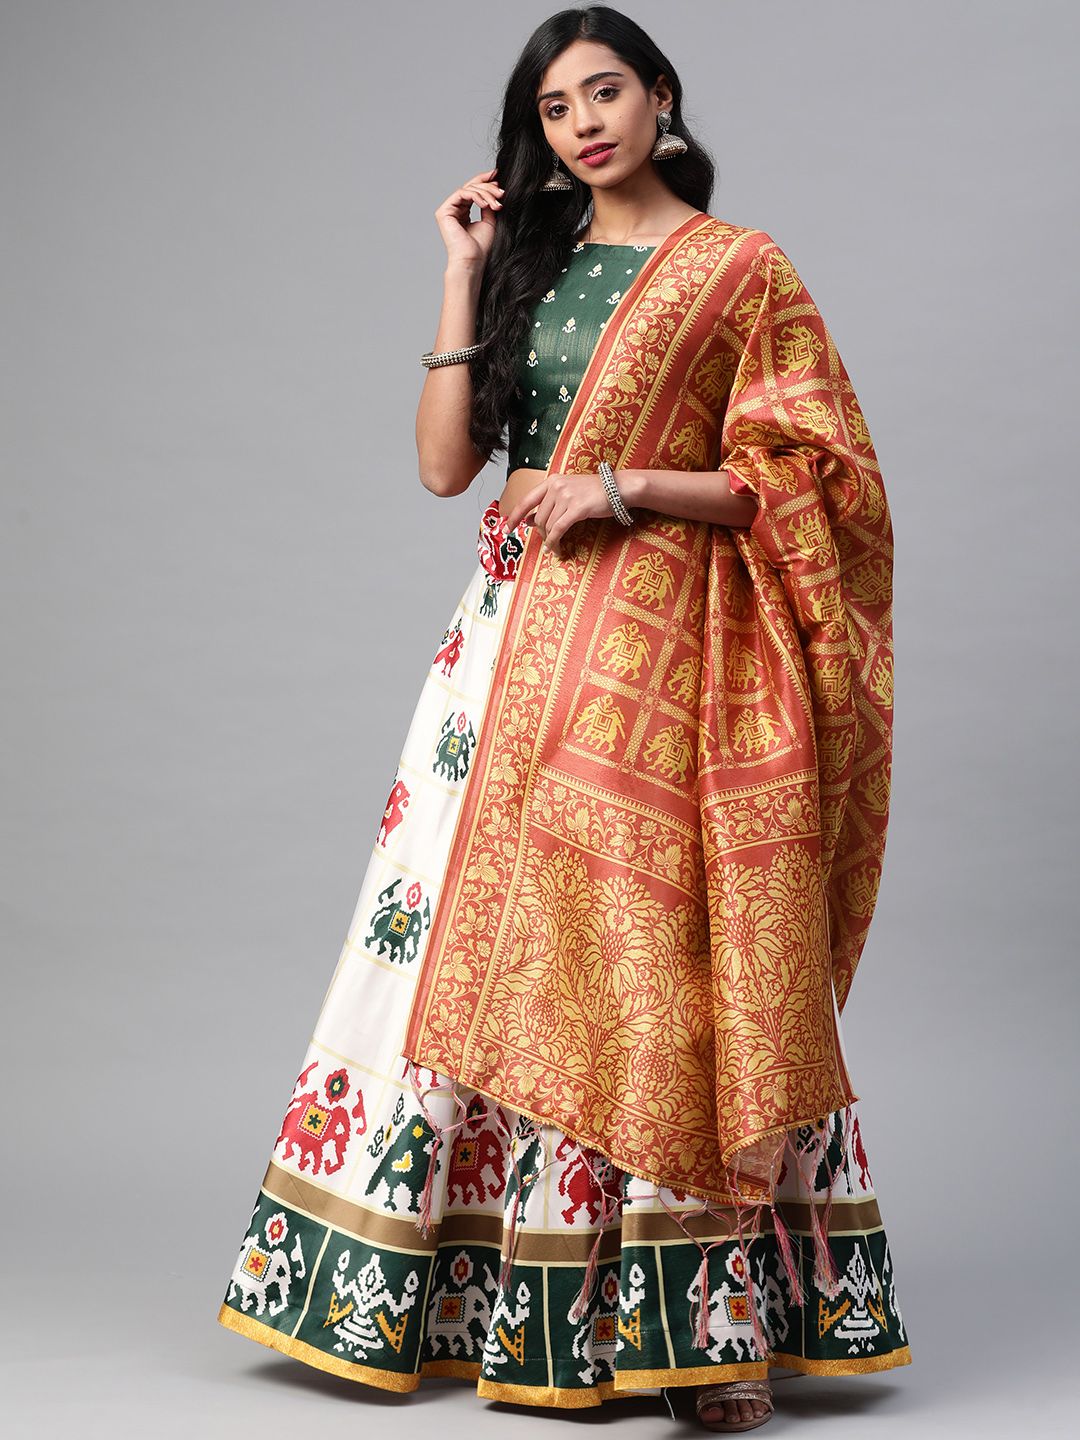 SHUBHVASTRA Green & White Printed Semi-Stitched Lehenga & Unstitched Blouse With Dupatta Price in India